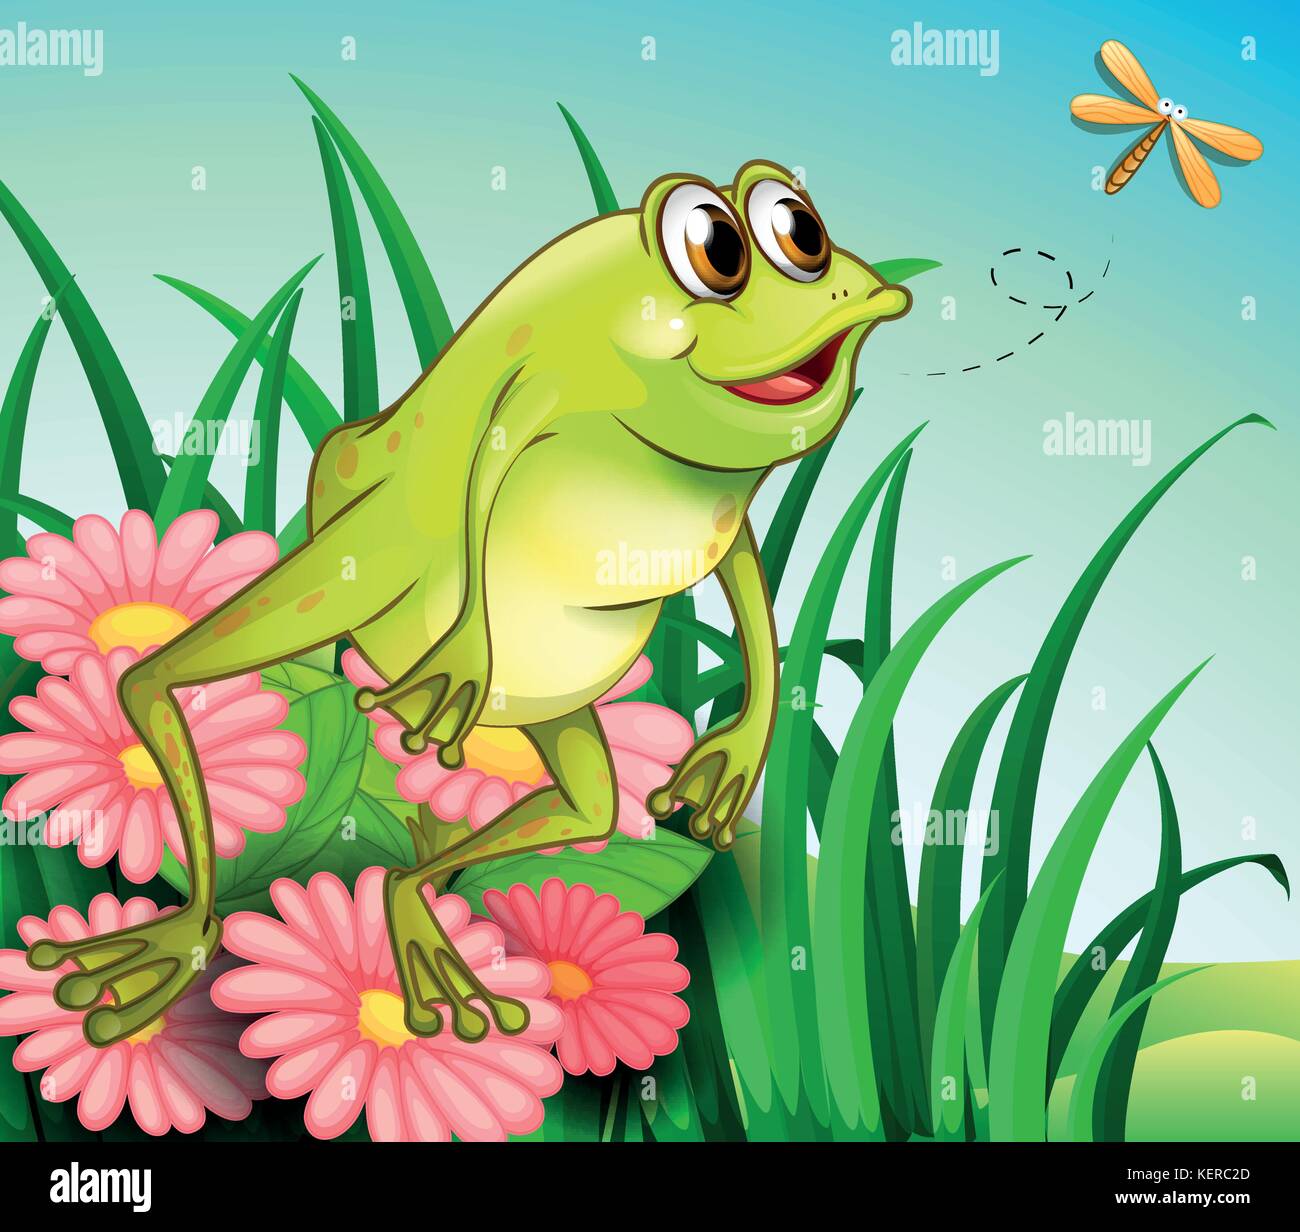 Illustration of a hungry frog at the garden Stock Vector